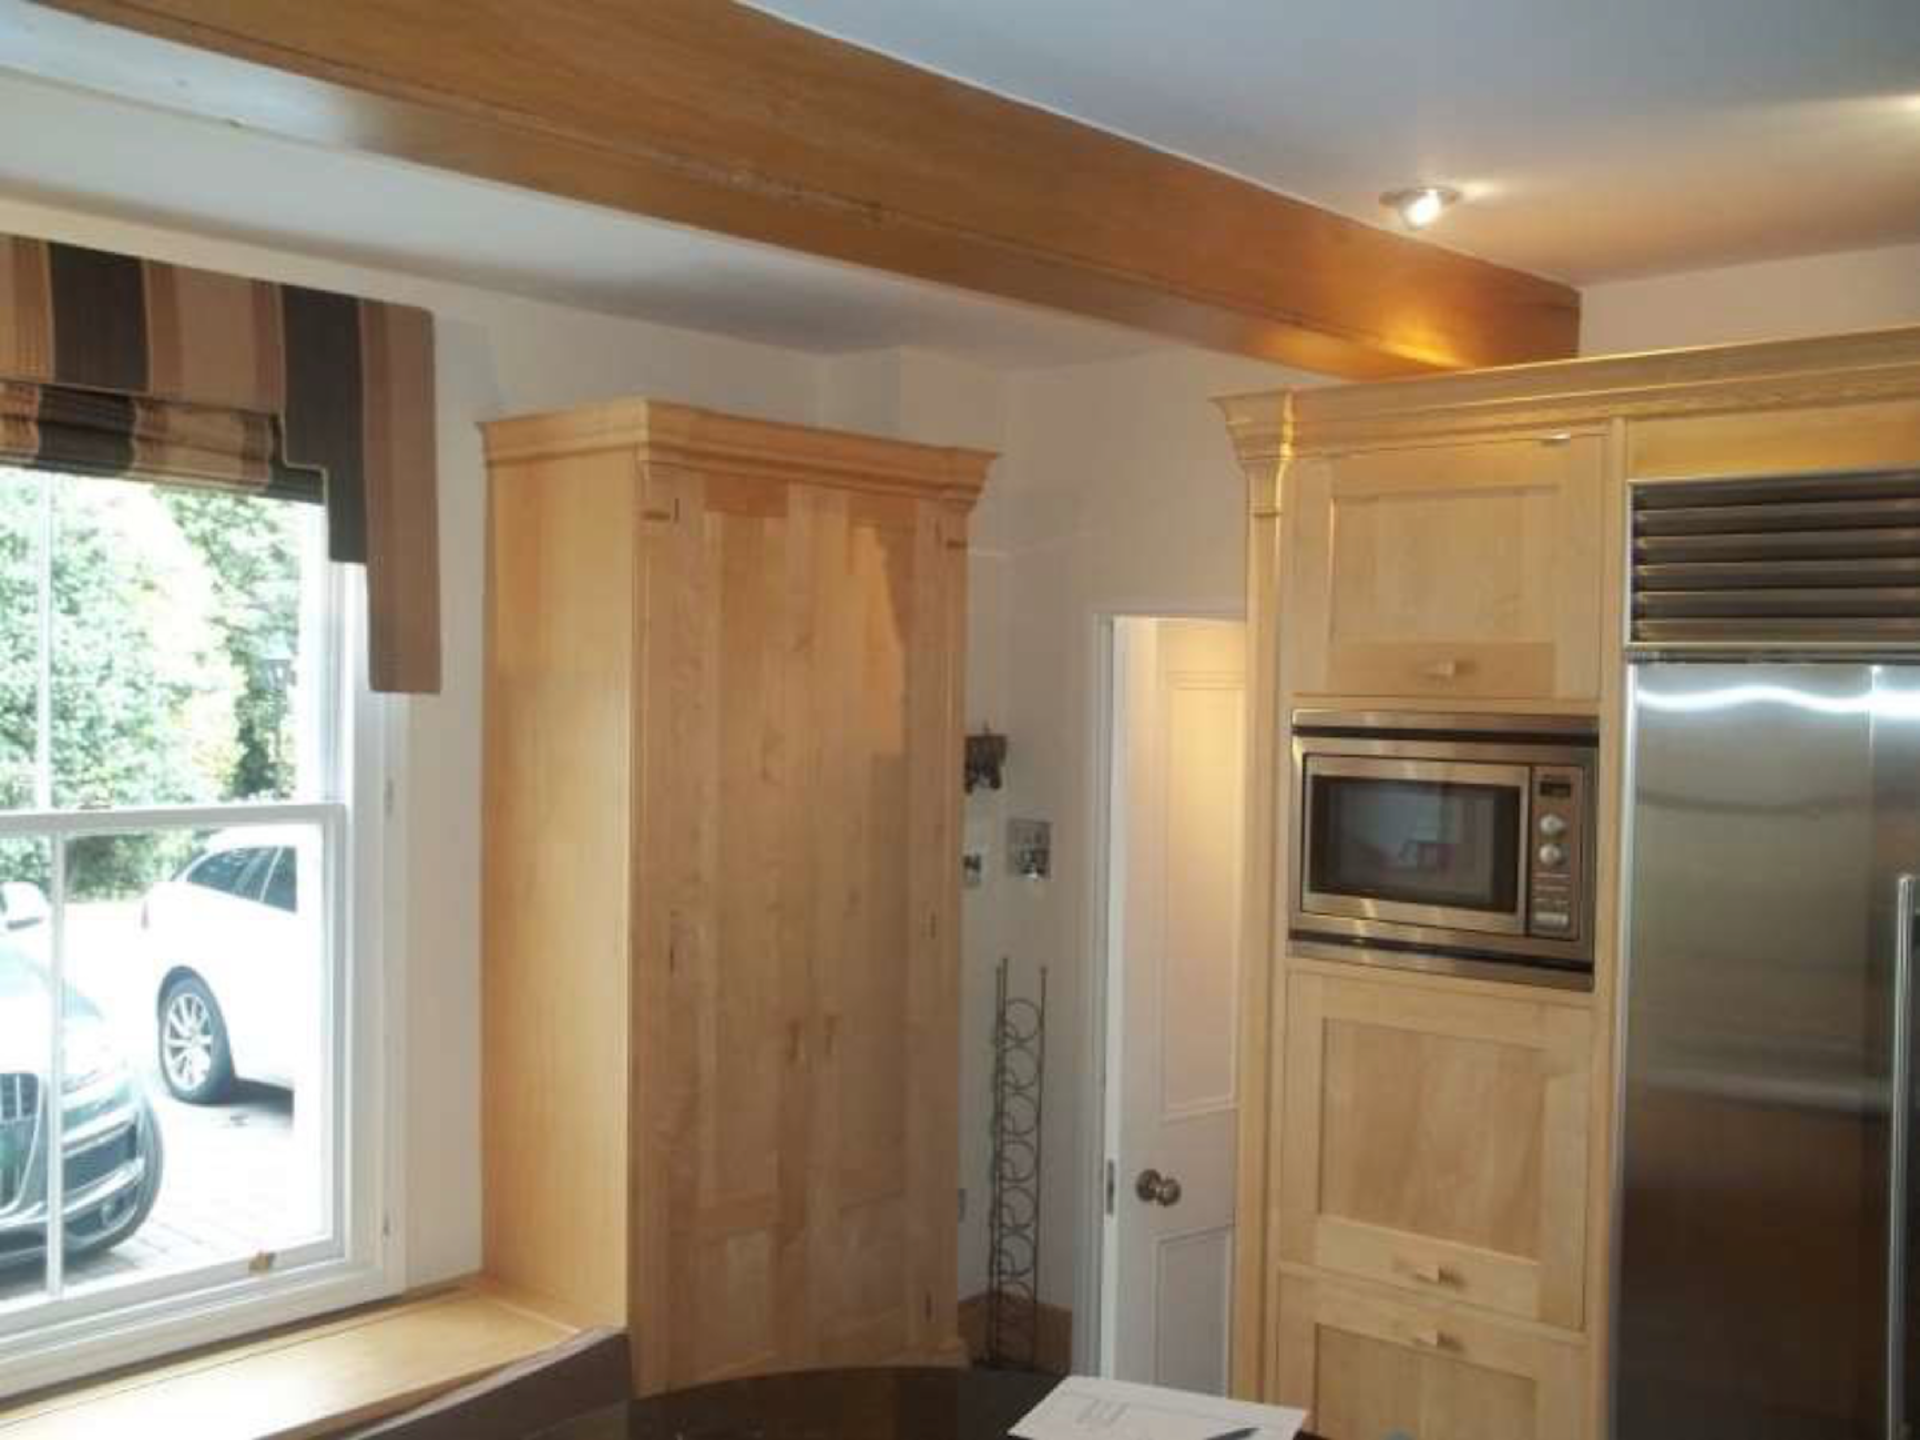 Luxury Used Mark Wilkinson Maple "Mai" Kitchen Complete with Aga and Miele Appliances - Image 14 of 14